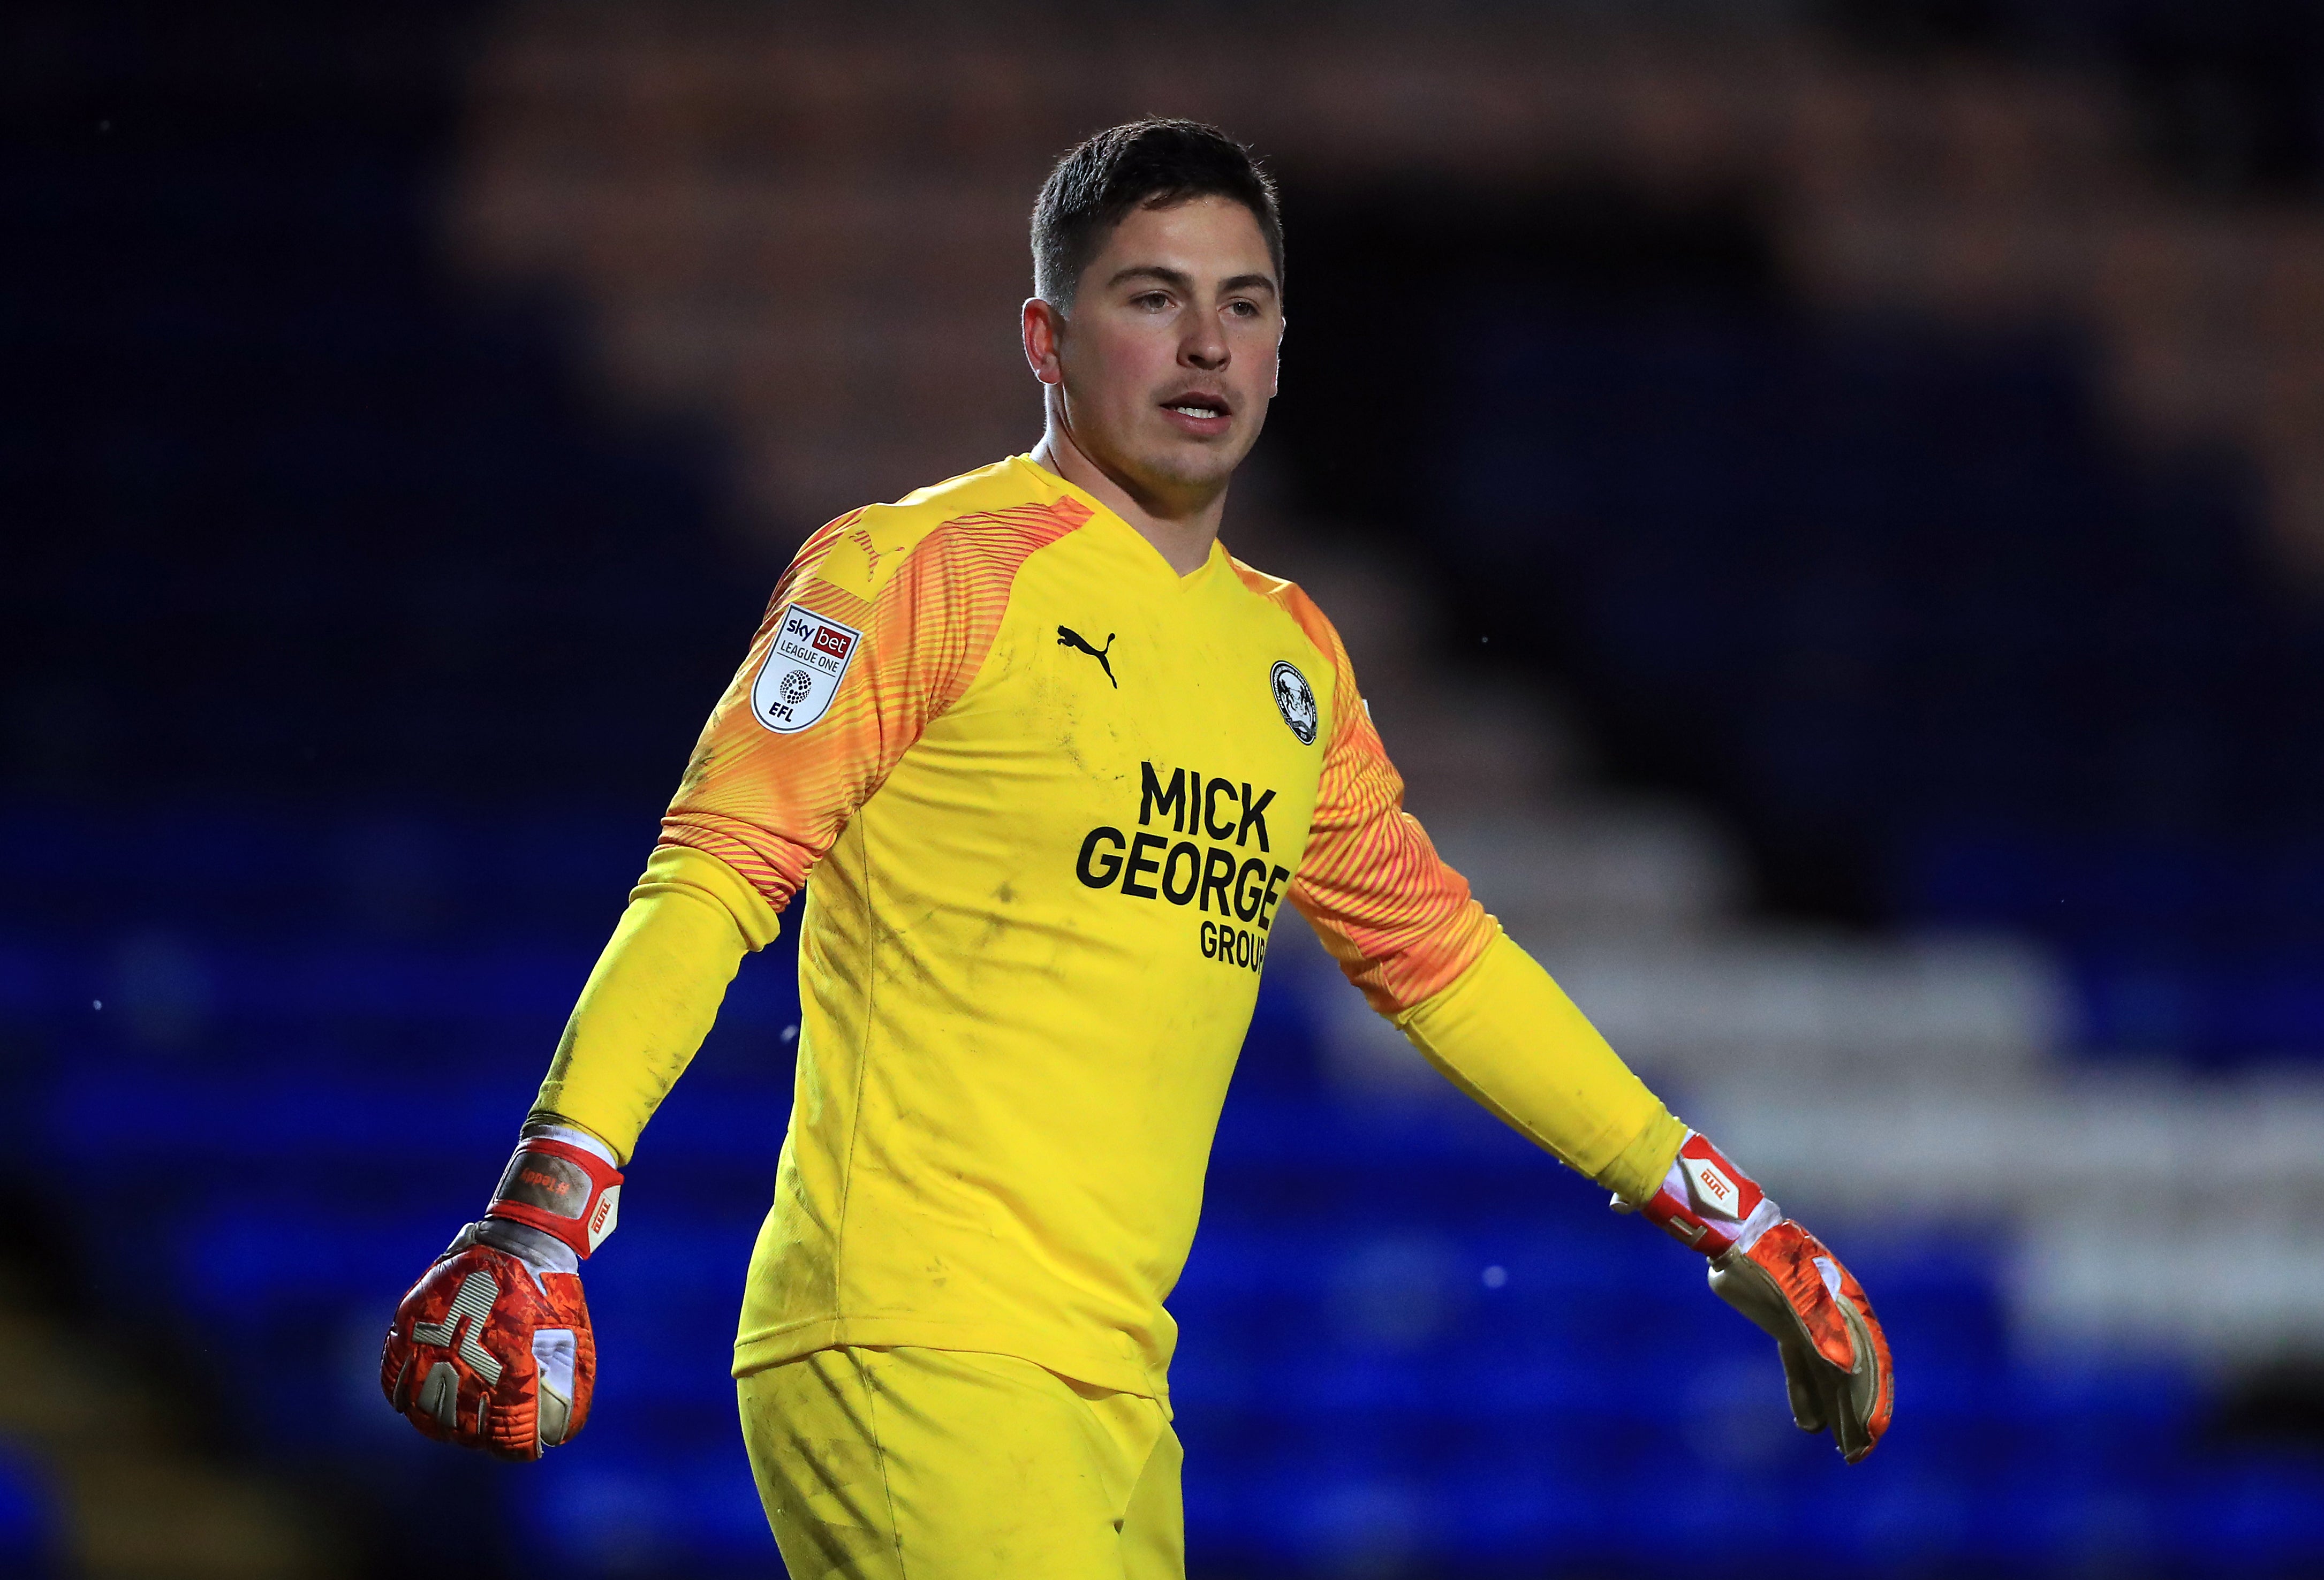 Peterborough keeper Christy Pym has signed a new three-year deal